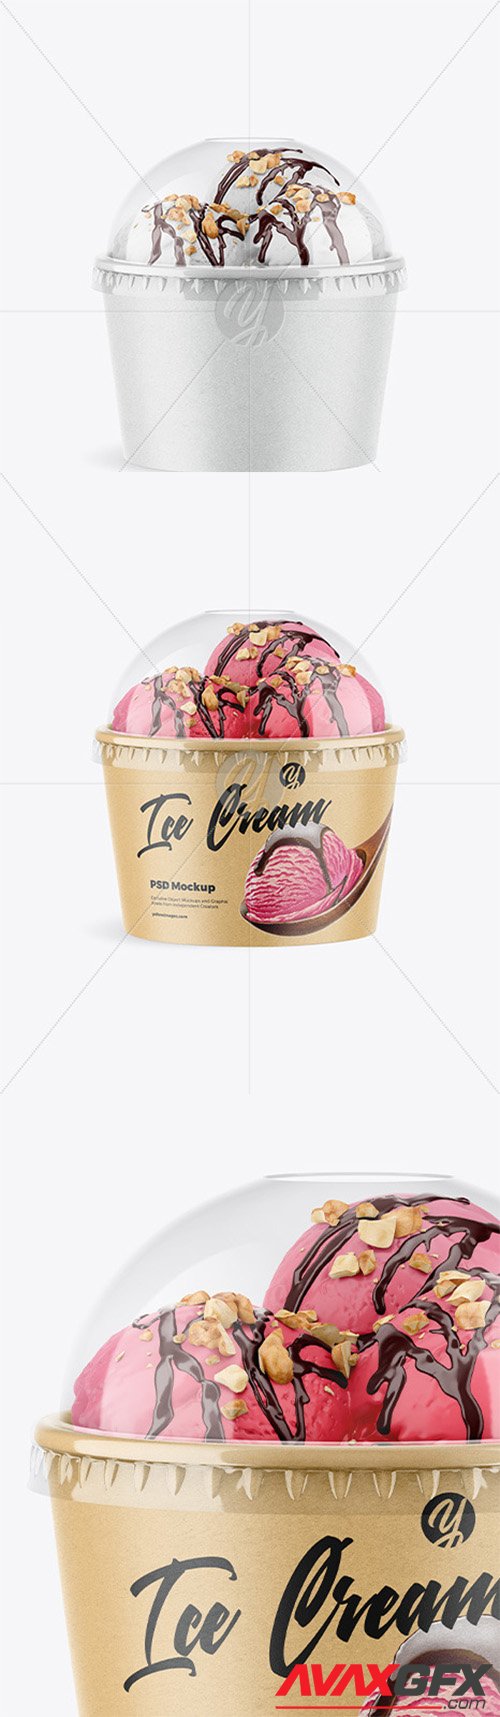 Download Kraft Ice Cream Cup With Plastic Cap Mockup Front View 60414 Avaxgfx All Downloads That You Need In One Place Graphic From Nitroflare Rapidgator Yellowimages Mockups